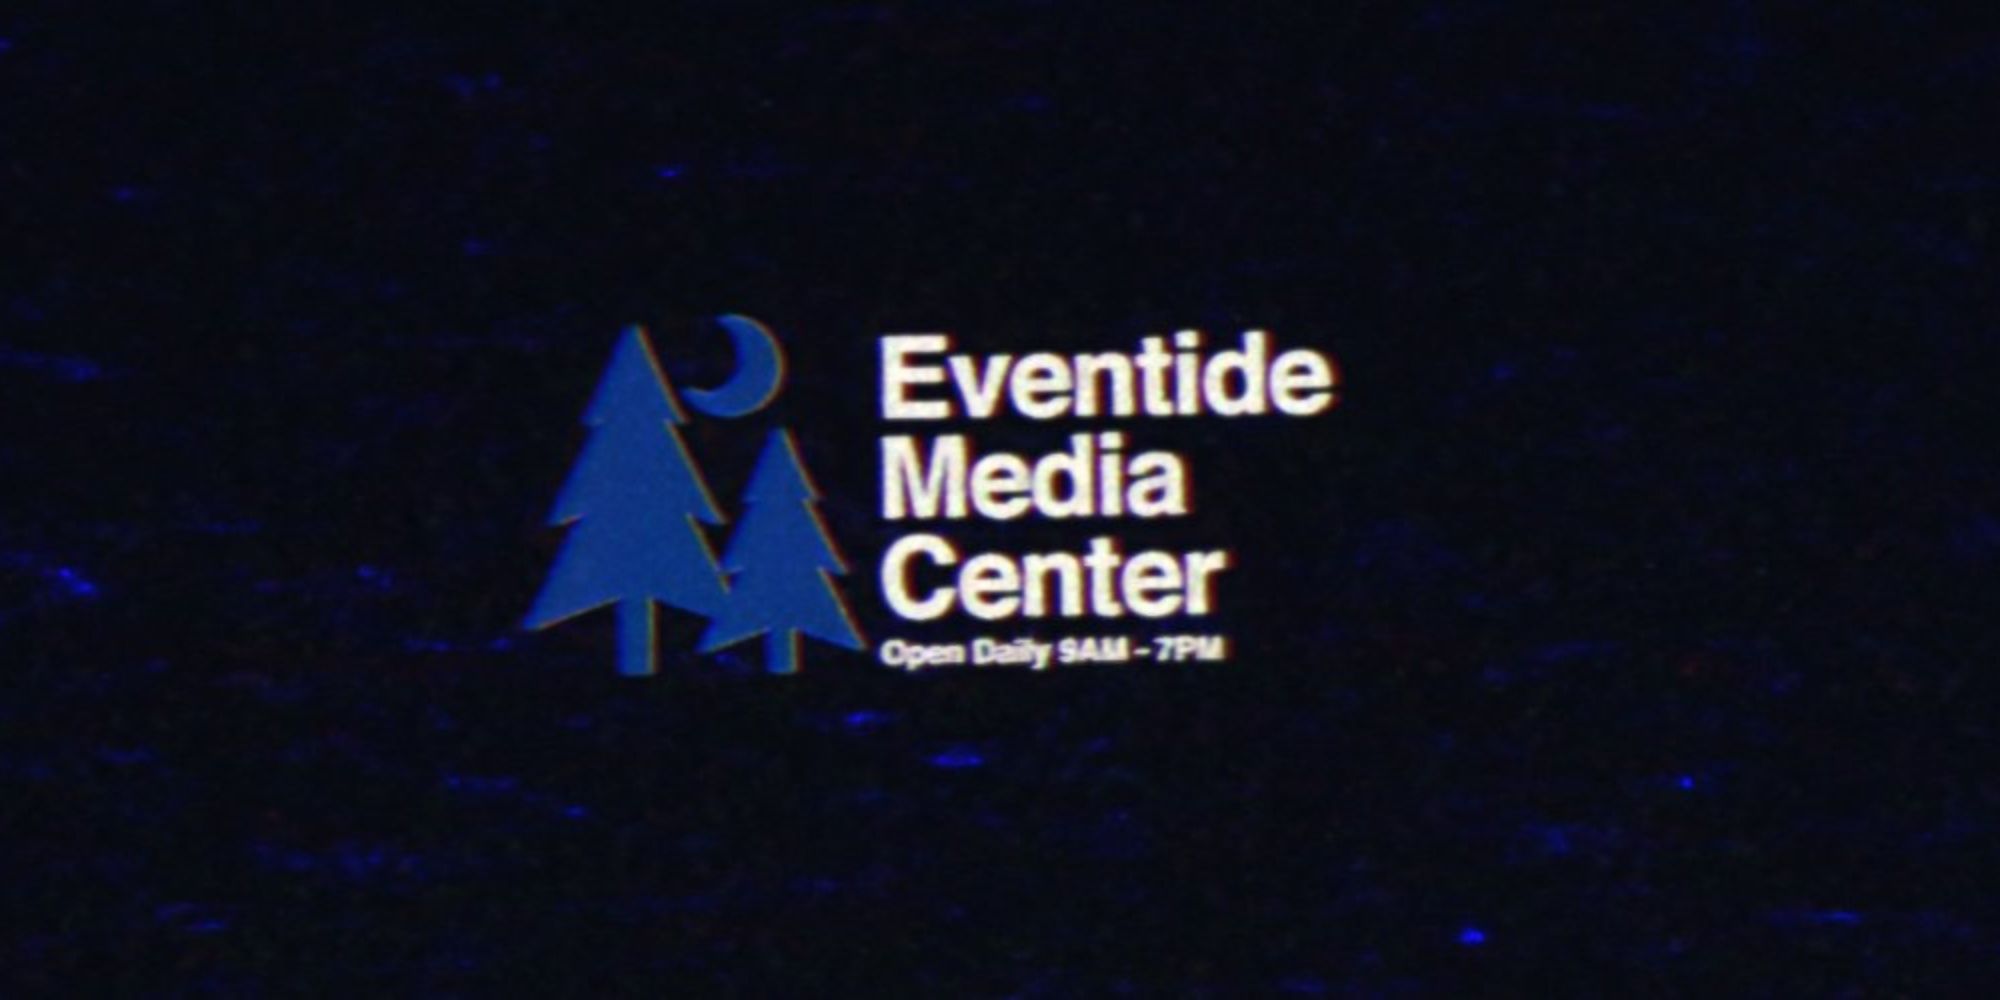 The logo of the Eventide Media Center from the series of the same name.